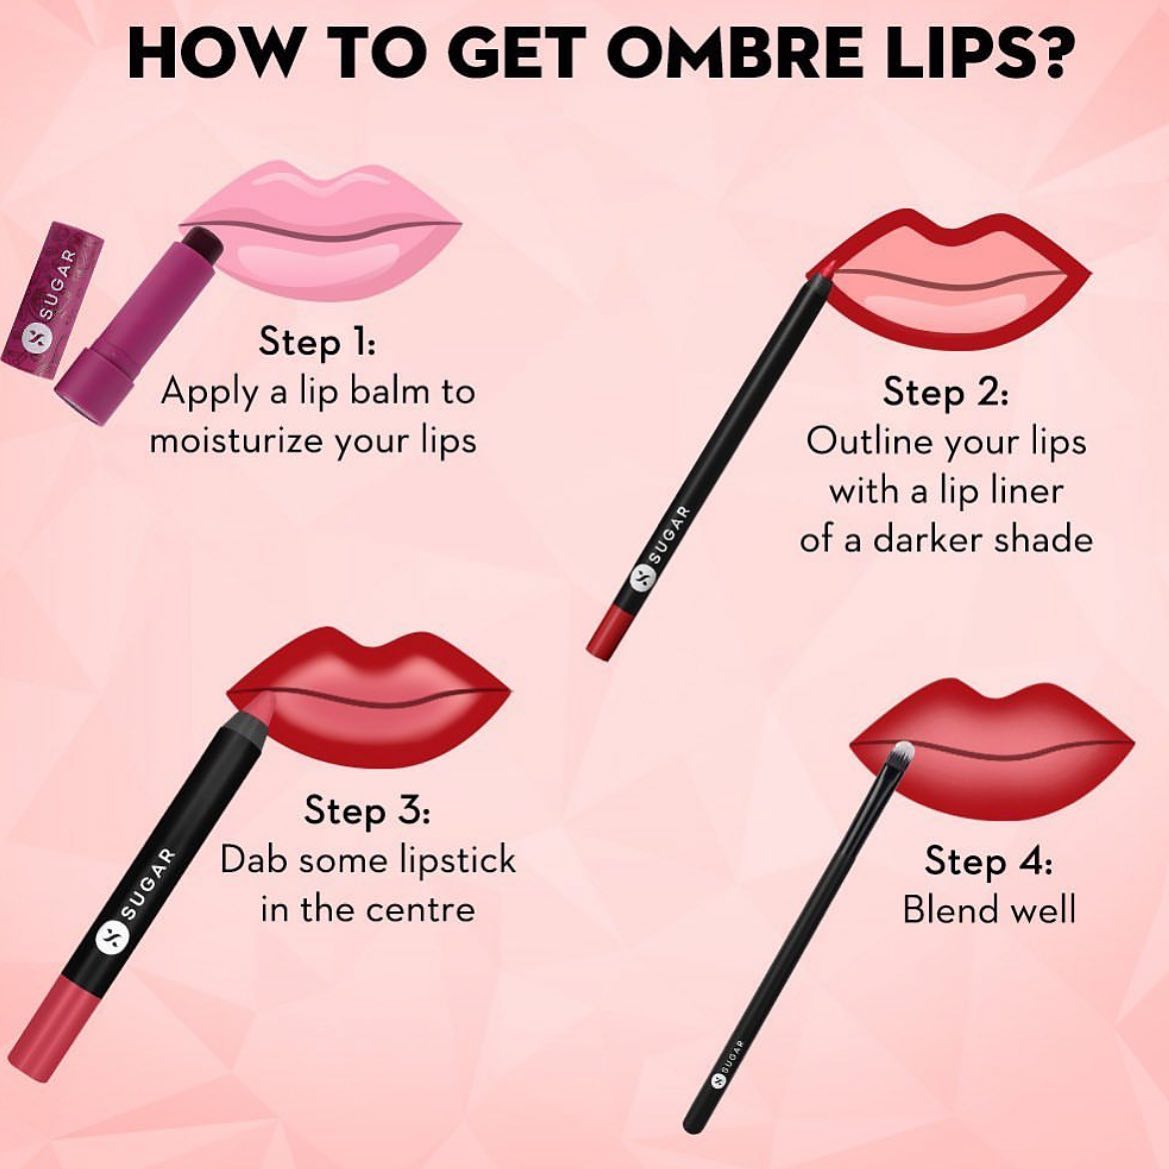 How to Get Ombre Lips Tutorial